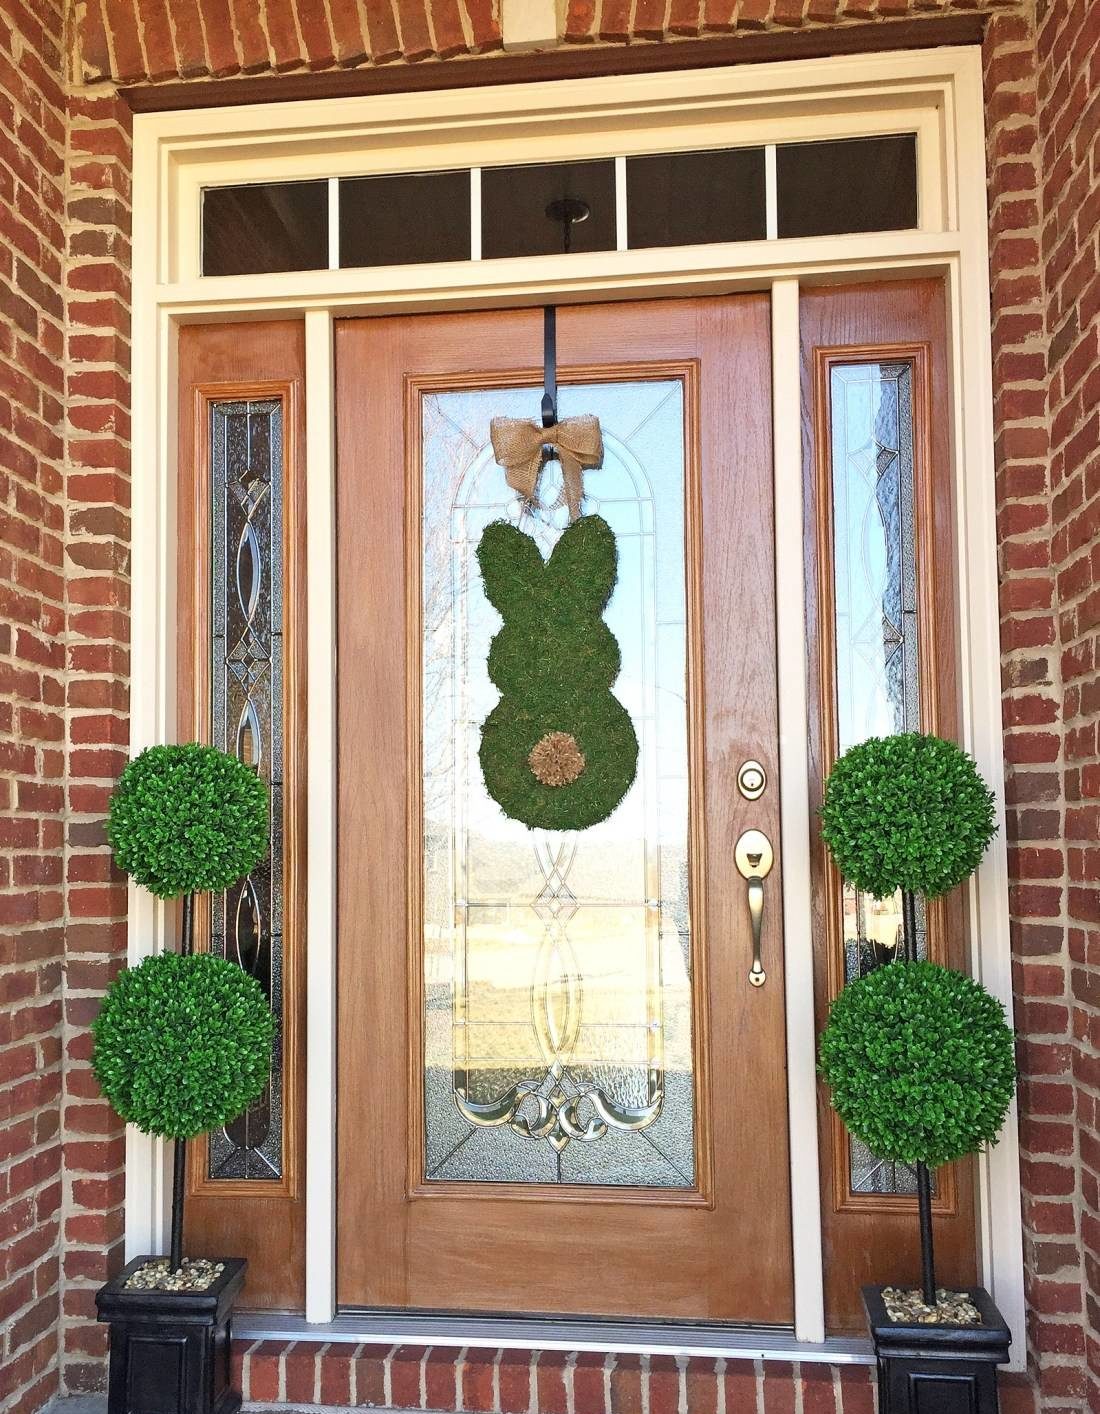 Moss bunny door decor with green potted plants on the sides